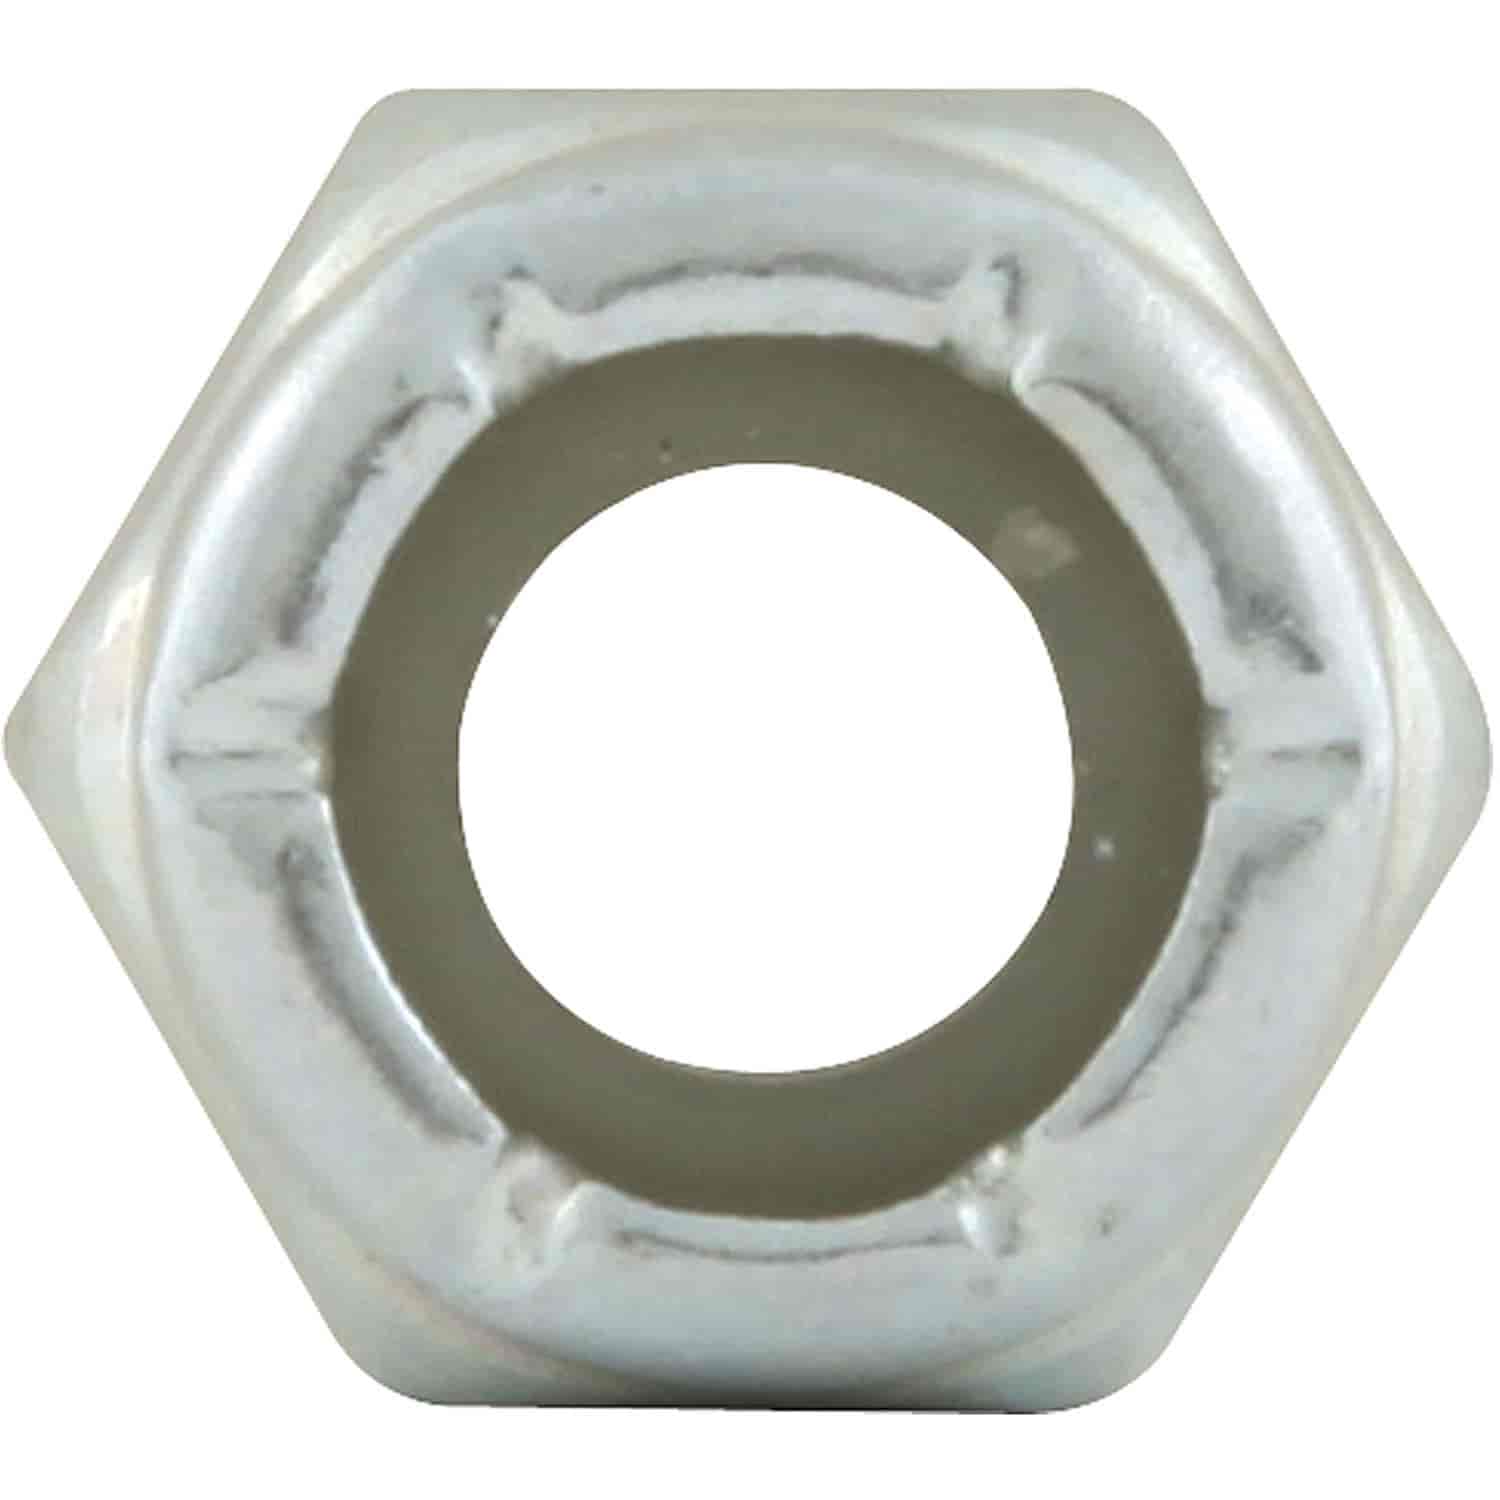 Coarse Thread Hex Nuts Thin With Nylon Inserts 1/4"-20